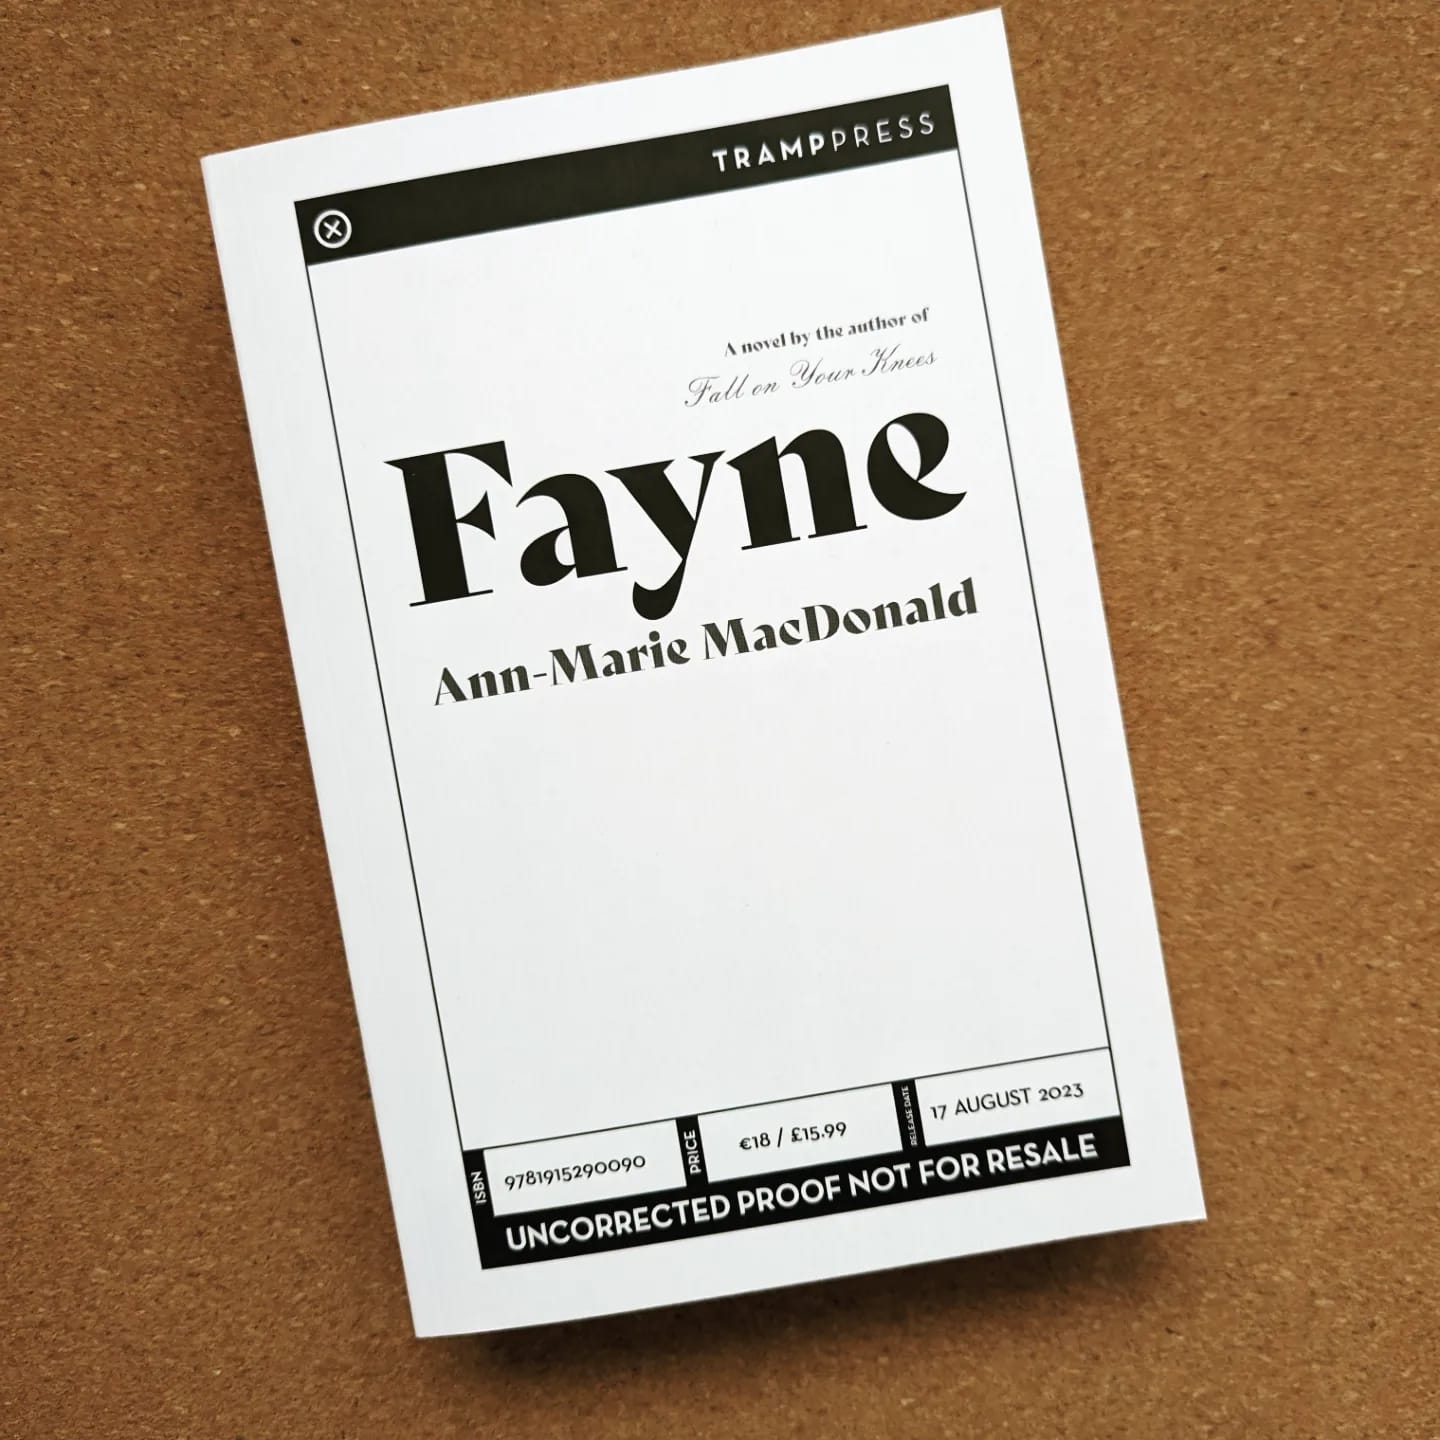 A pic of the galley proof of Fayne by Ann-Marie MacDonald